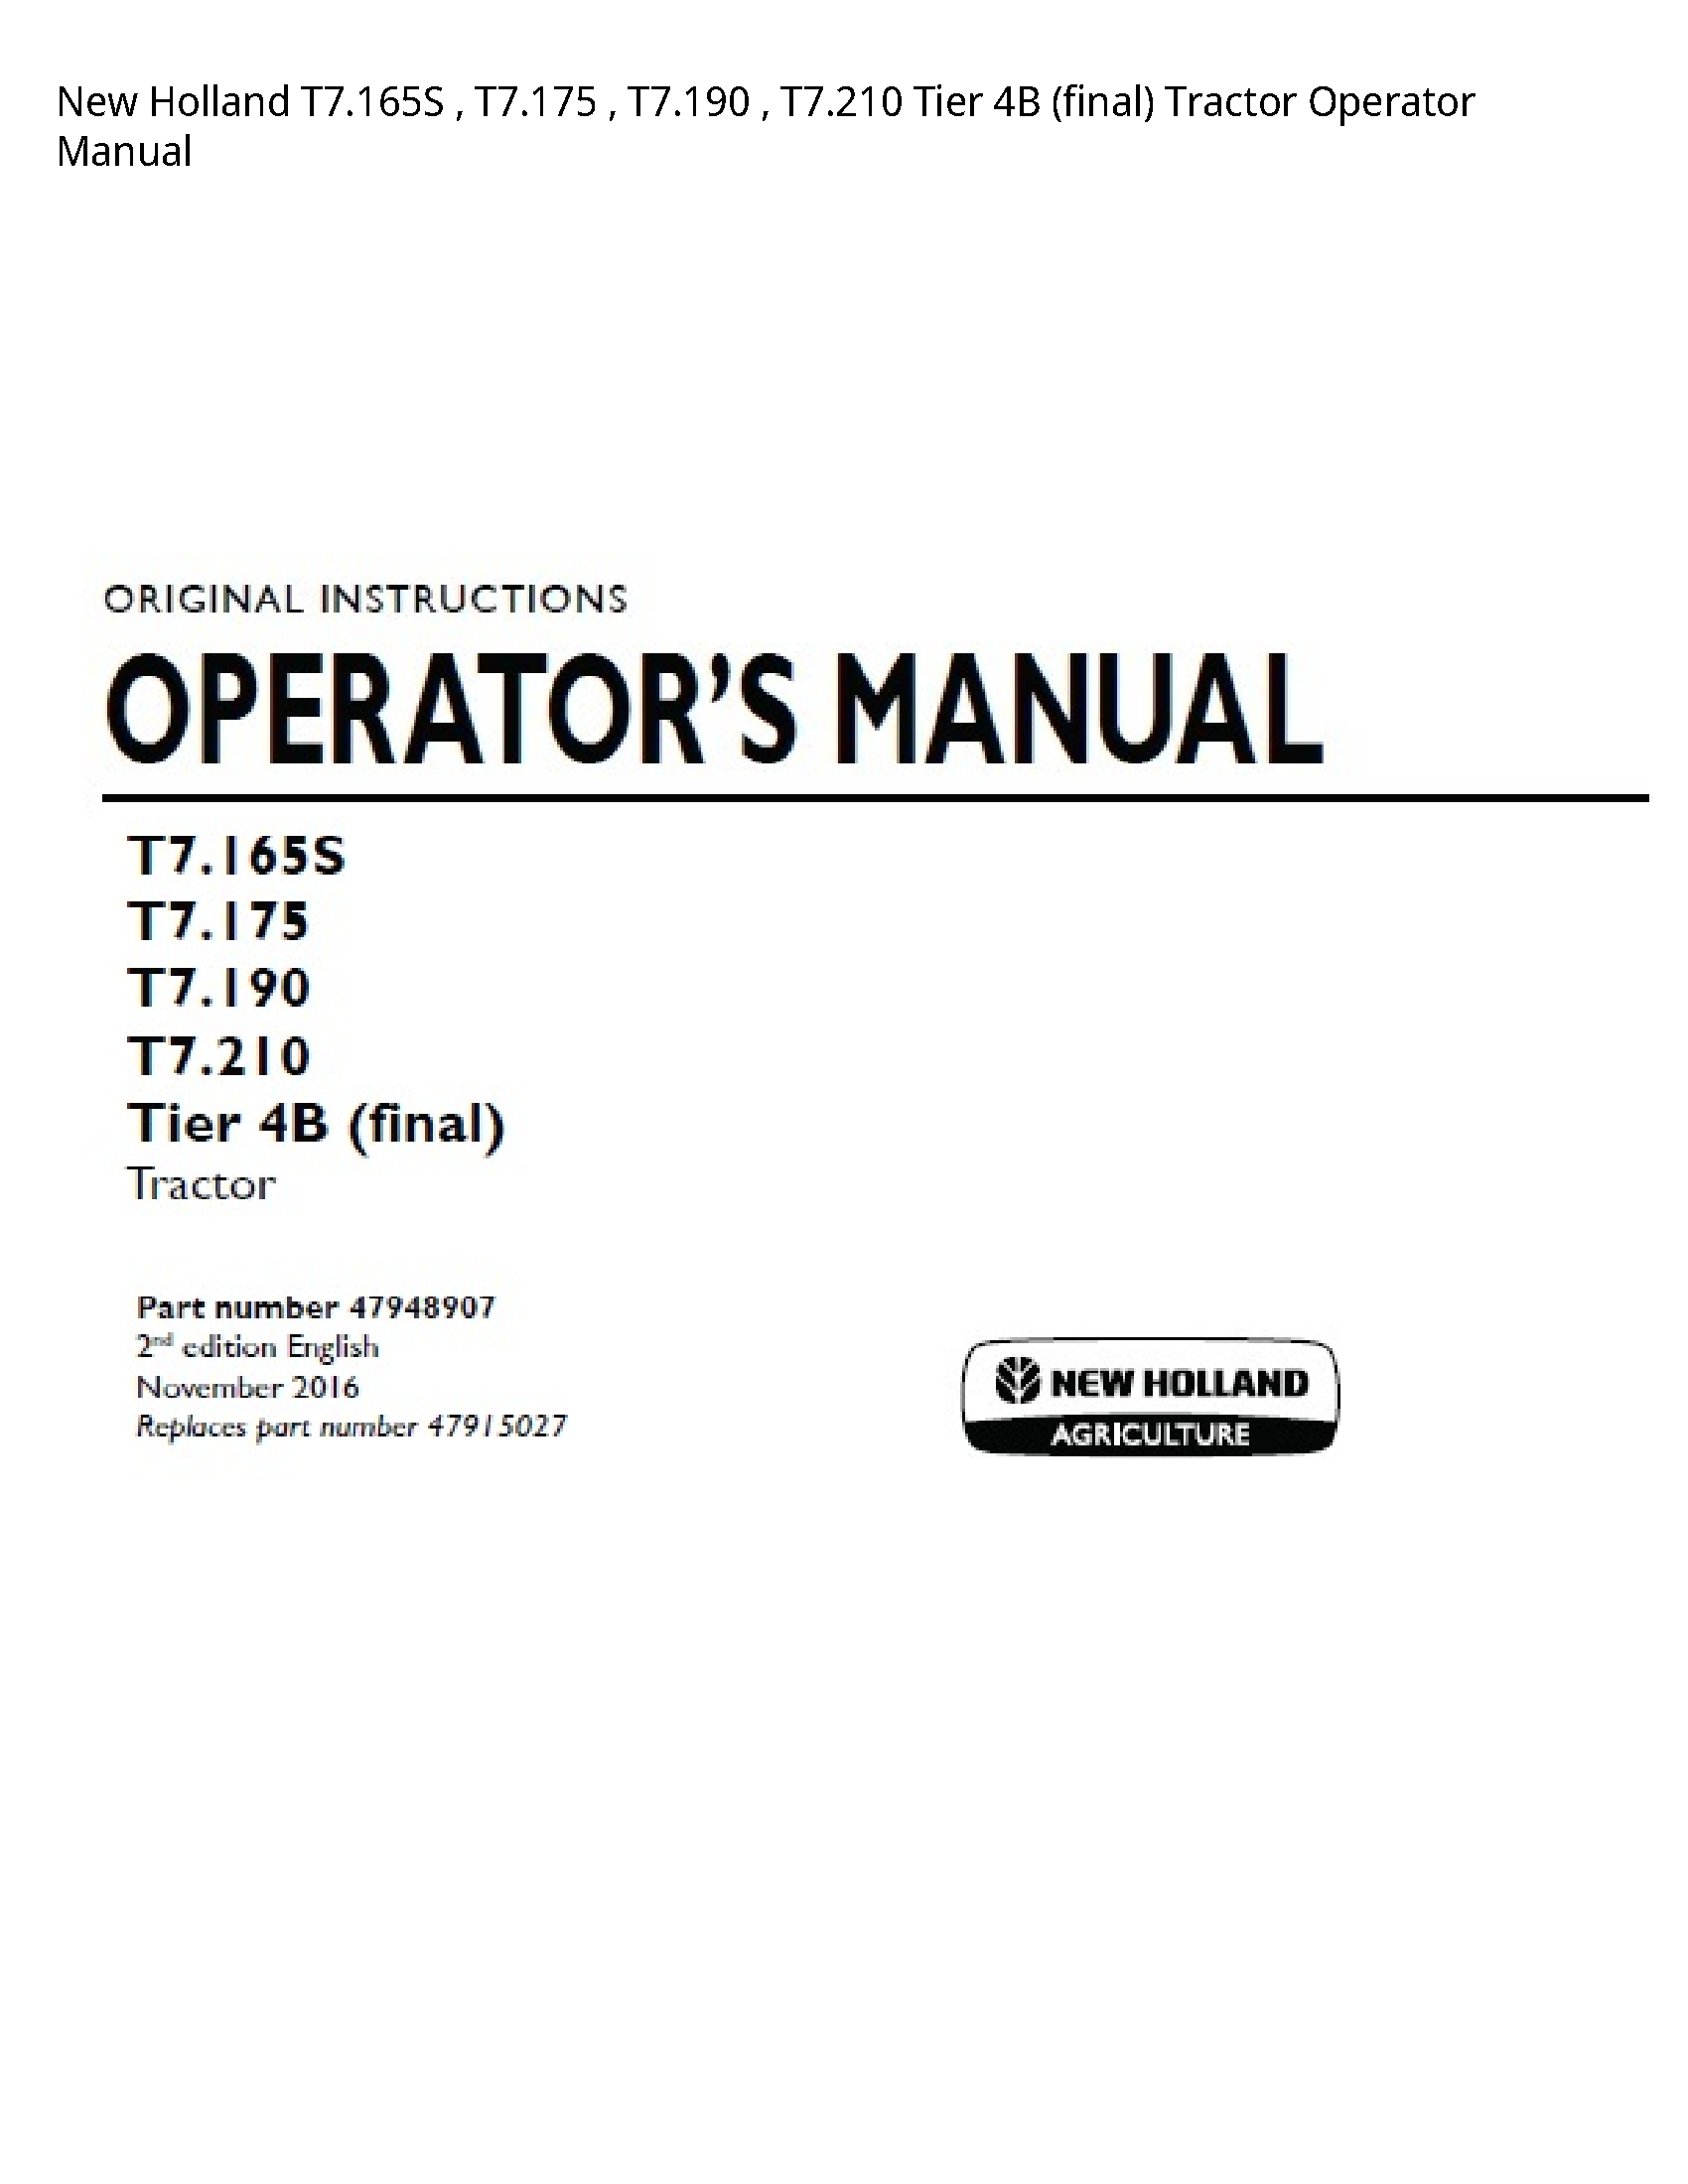 New Holland T7.165S Tier (final) Tractor Operator manual